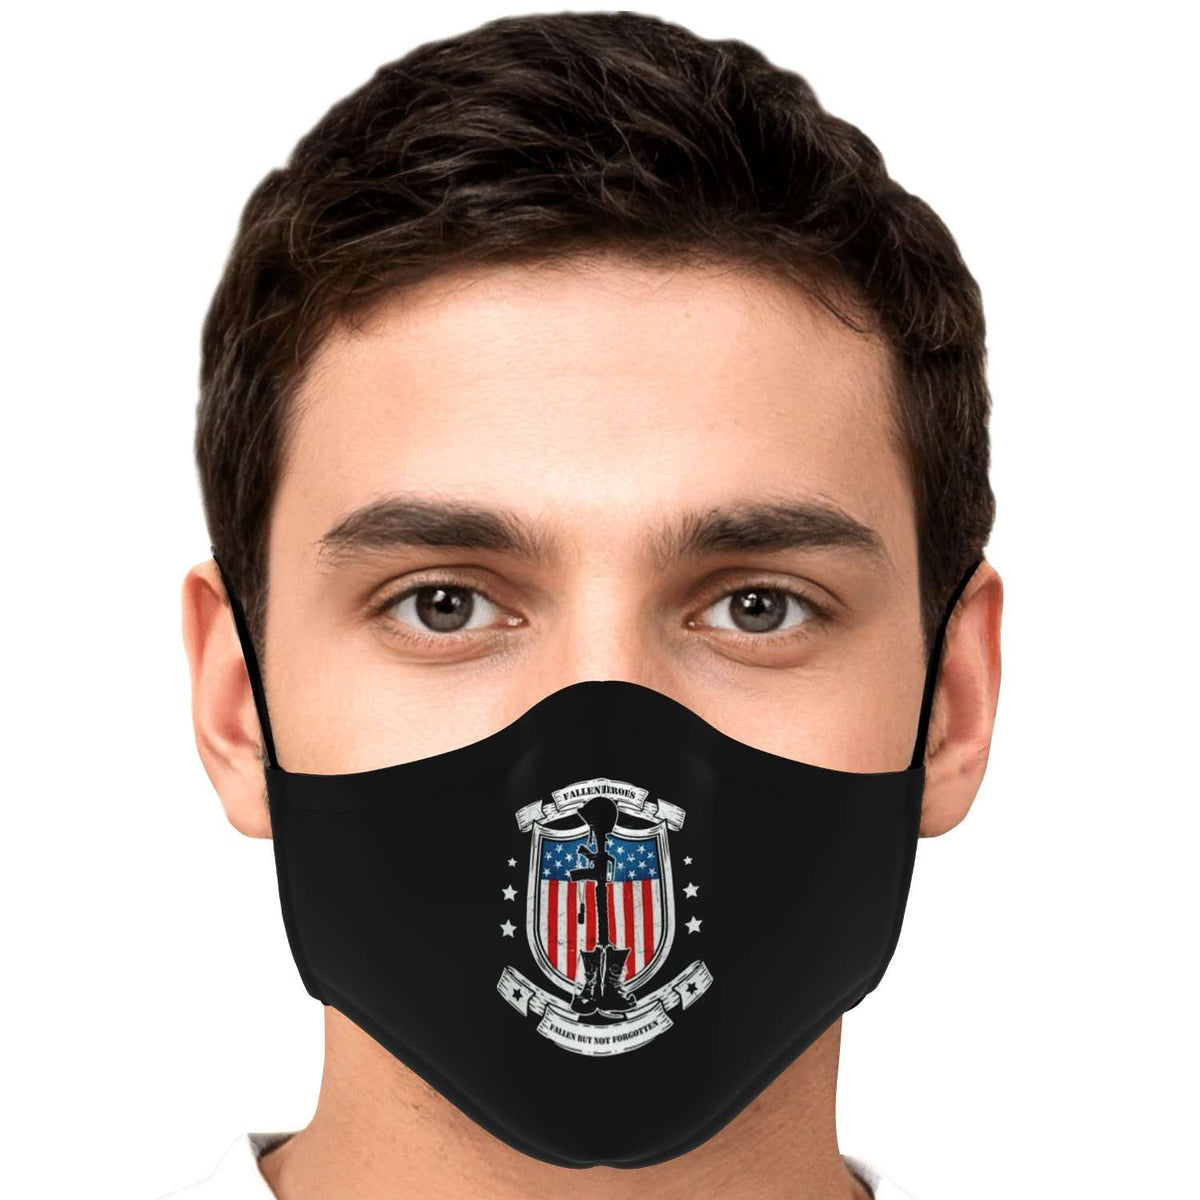 Designs by MyUtopia Shout Out:Fallen Heros - Fallen but not Forgotten Fitted Face Mask with Adjustable Ear Loops,Adult / Single / No filters,Fabric Face Mask